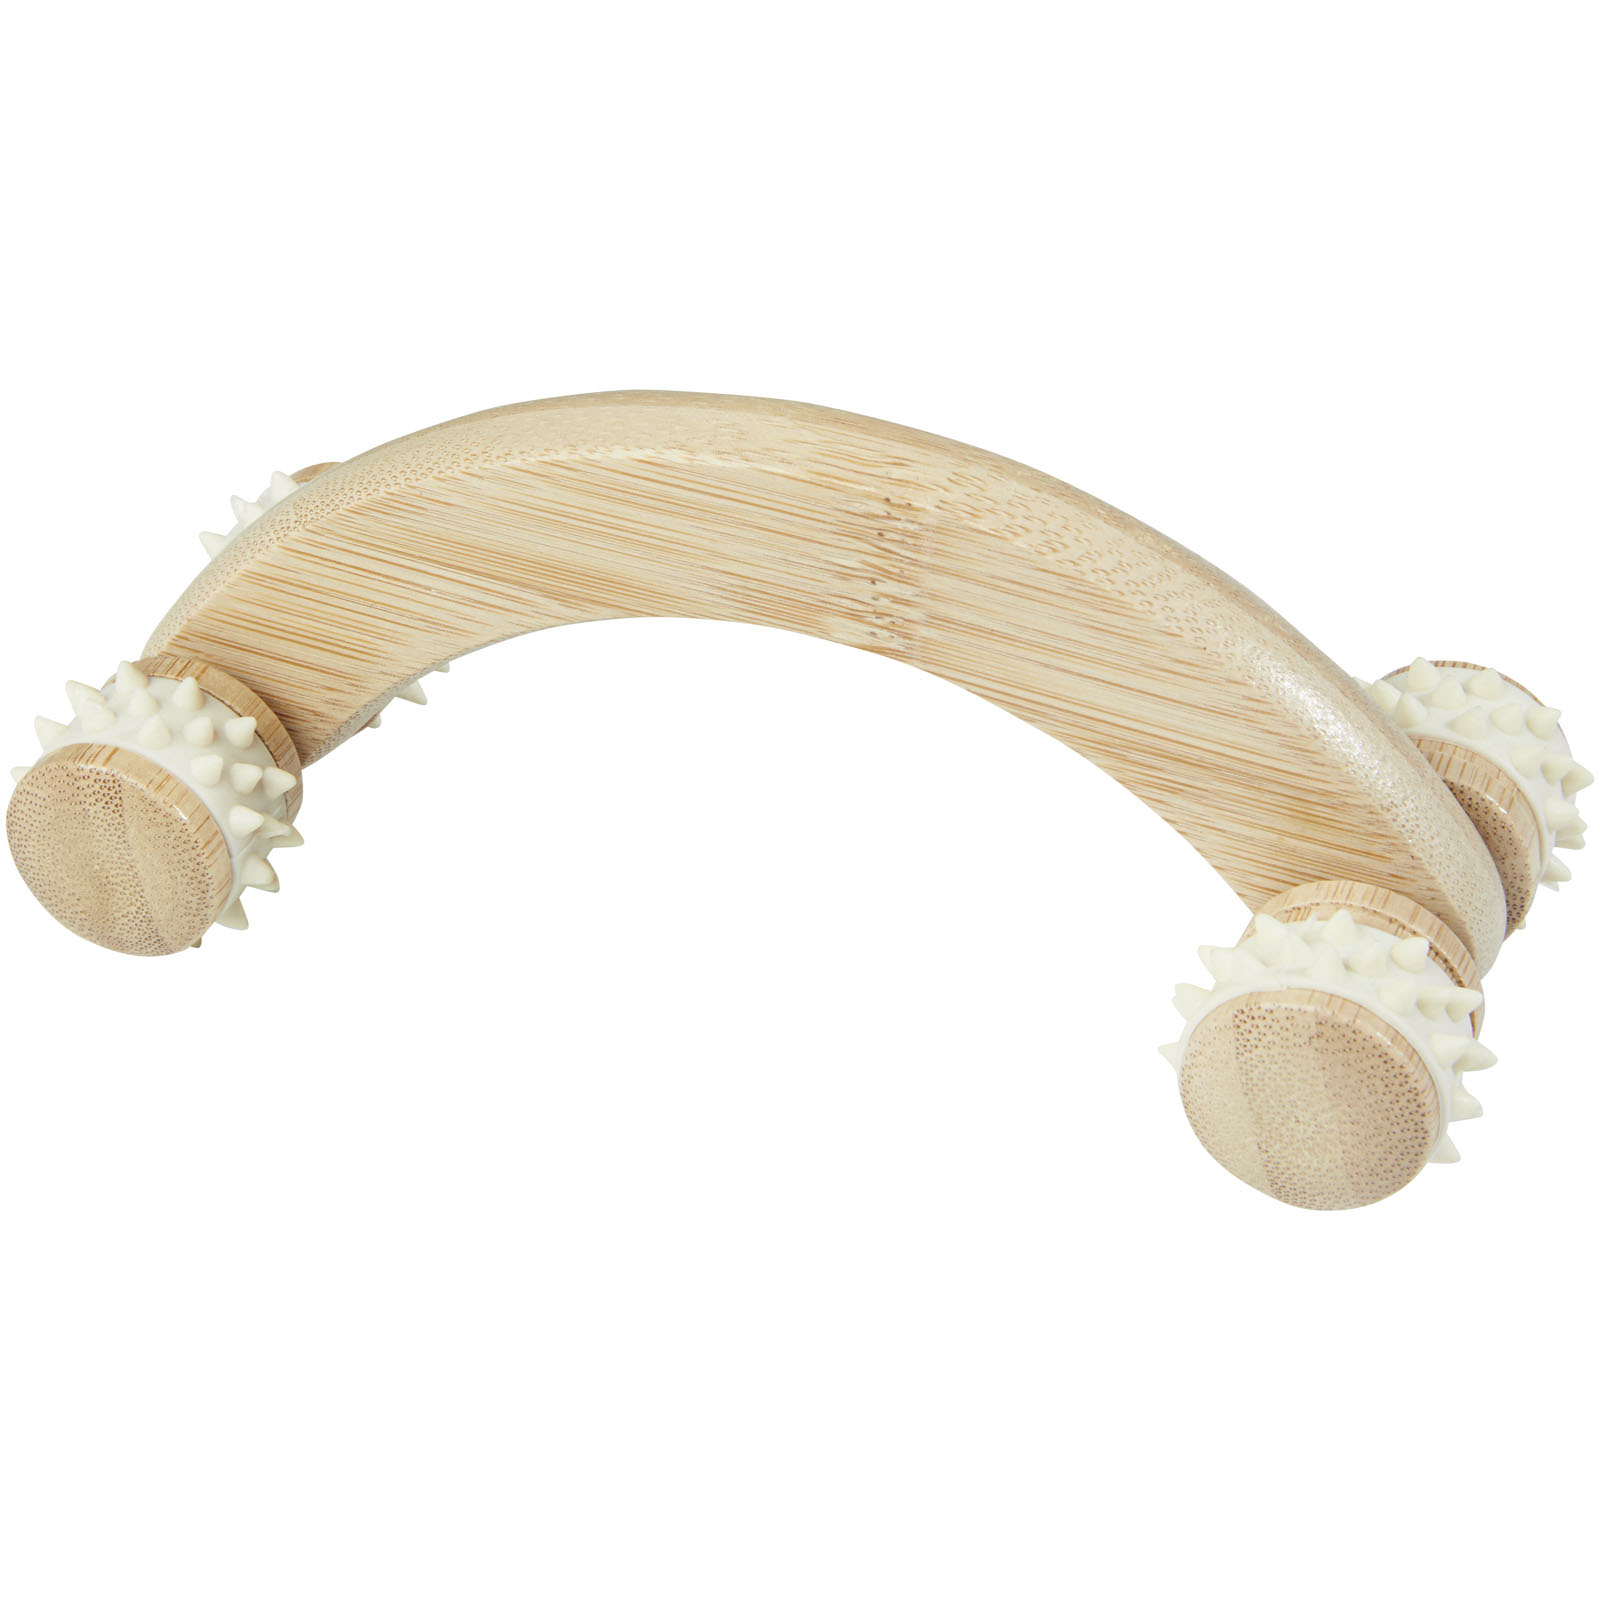 Health & Personal Care - Volu bamboo massager